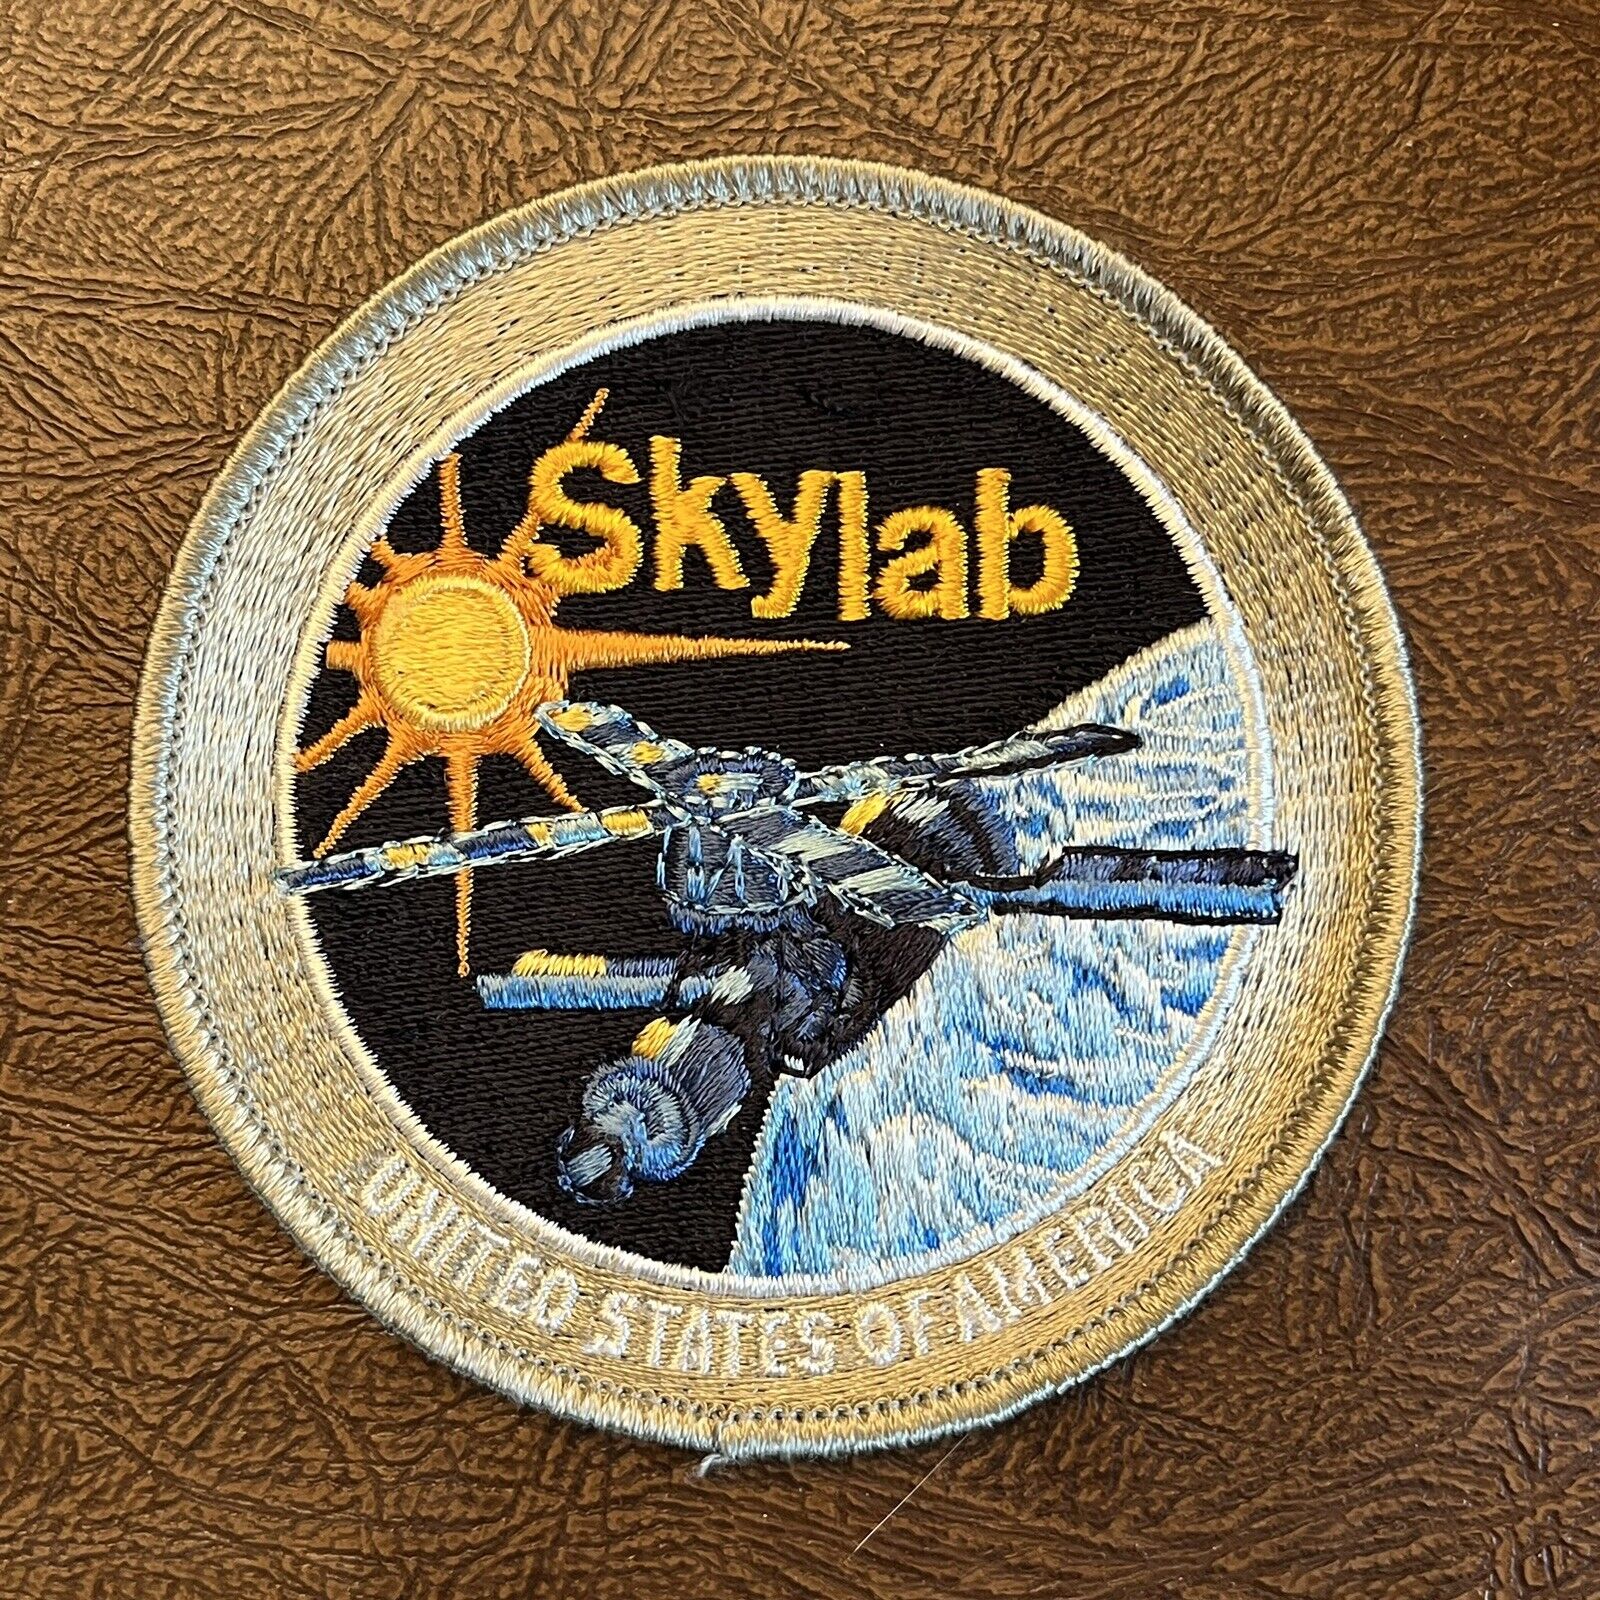 NASA Skylab mission patch reproduction 4 inch